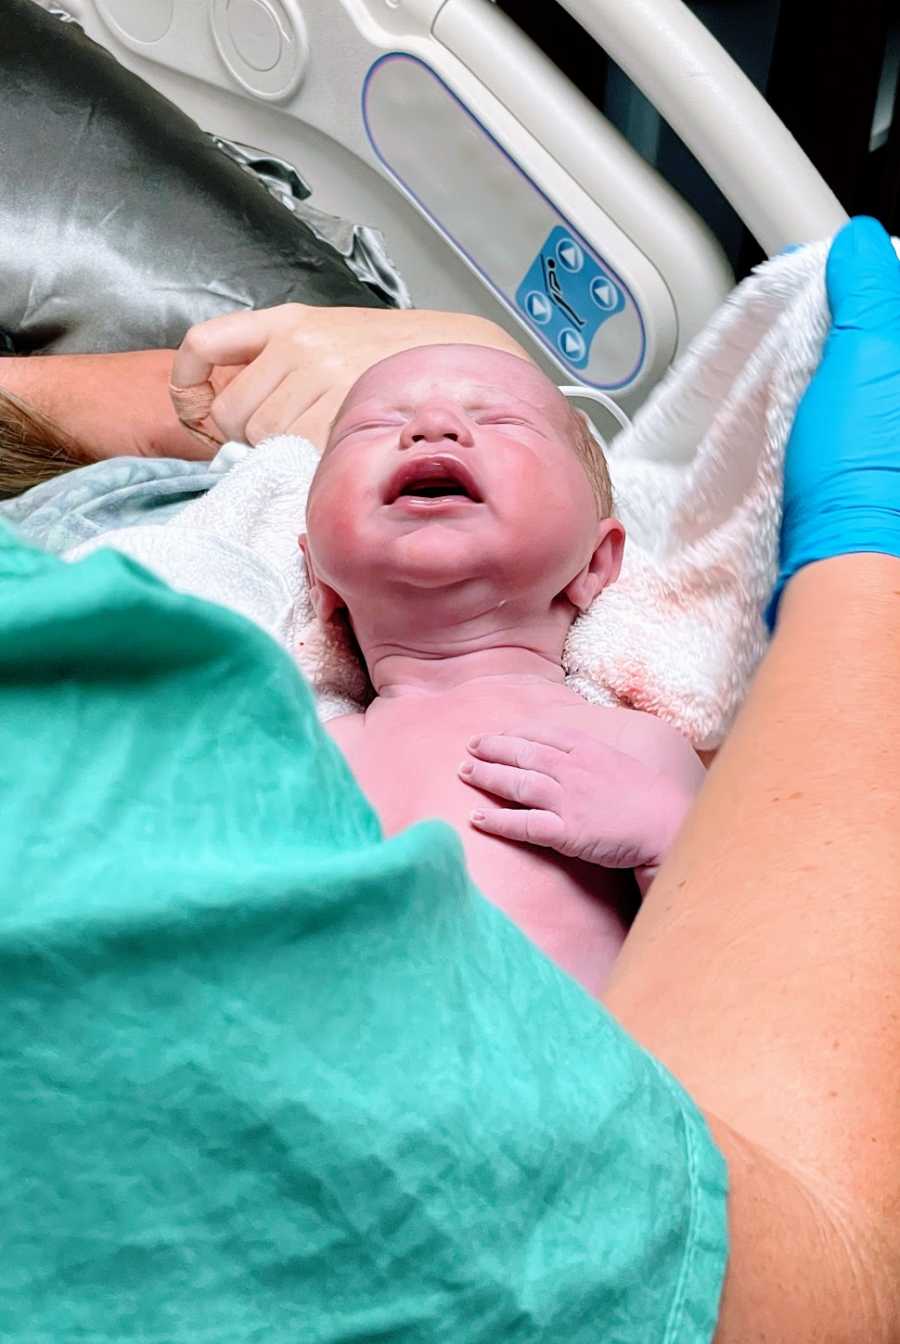 A baby boy is born from a gestational carrier in the hospital